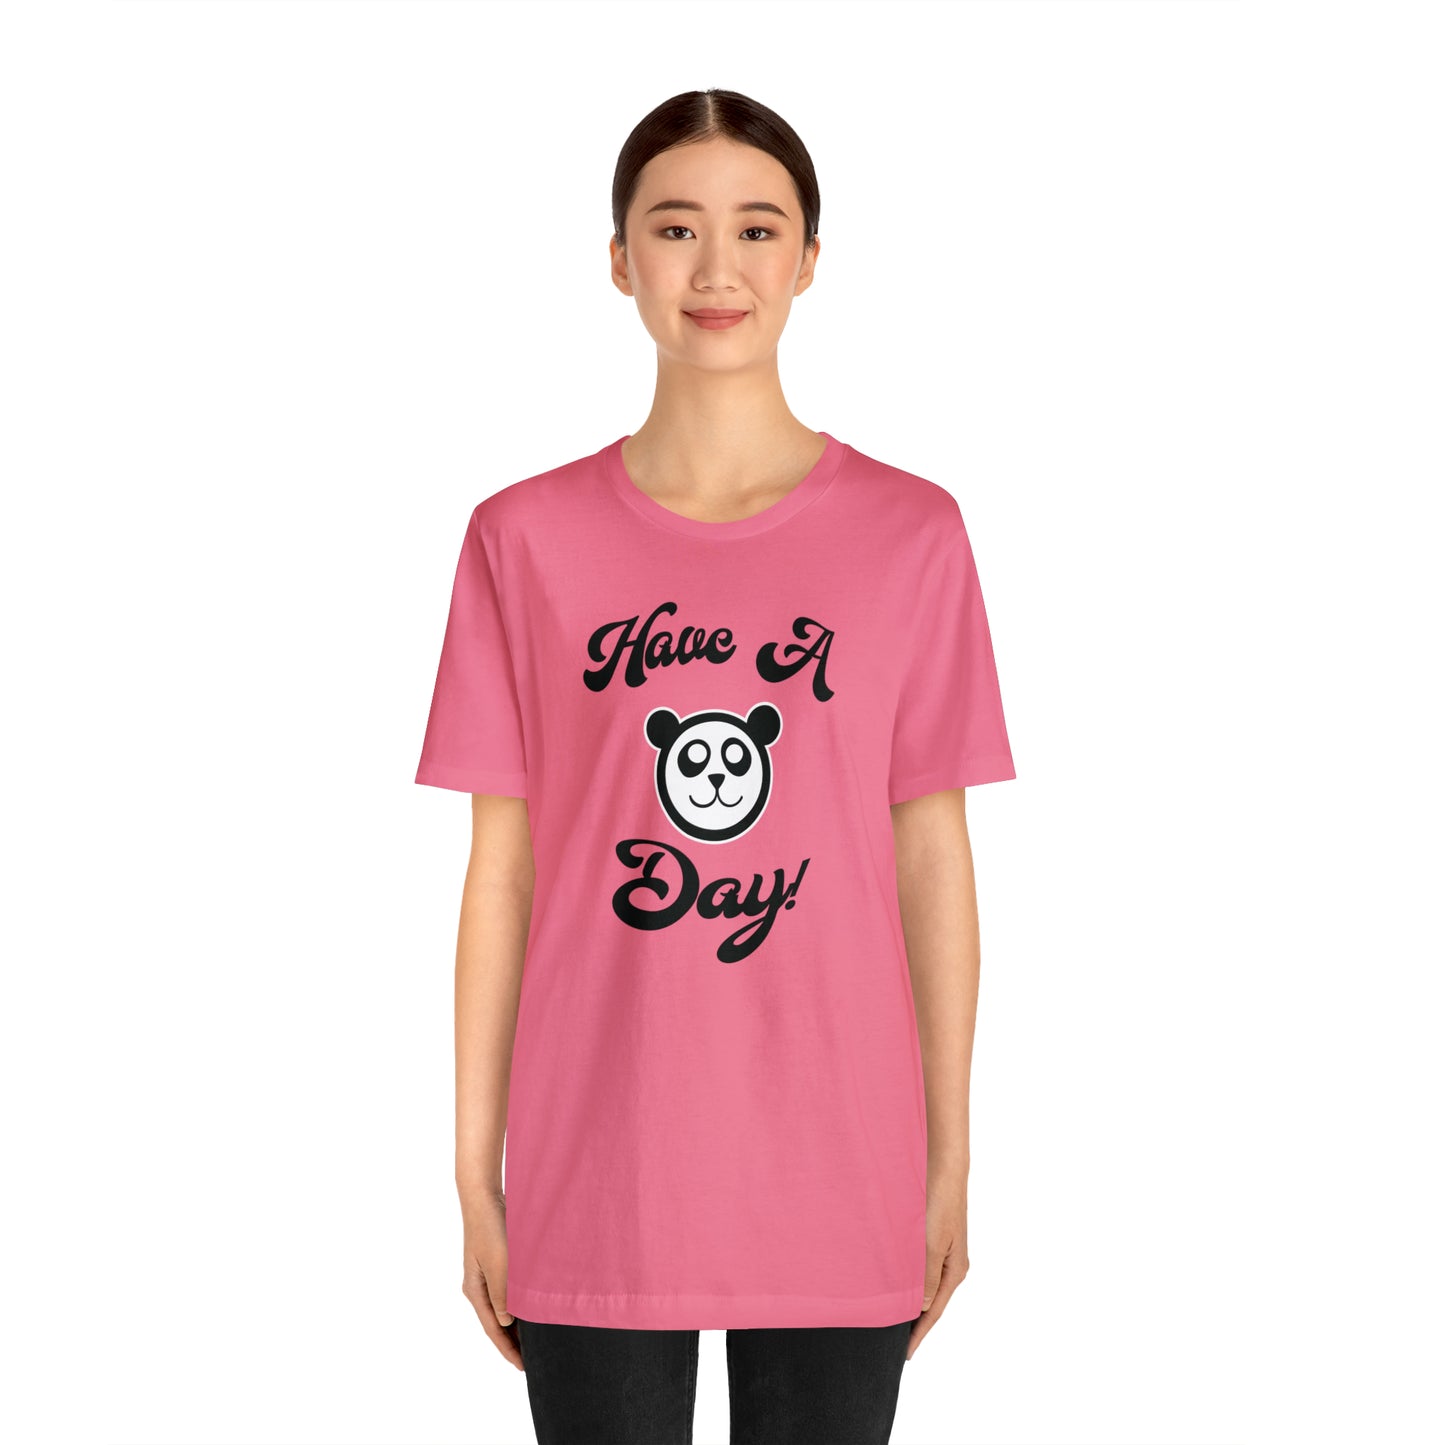 Have A Day! Premium Tee